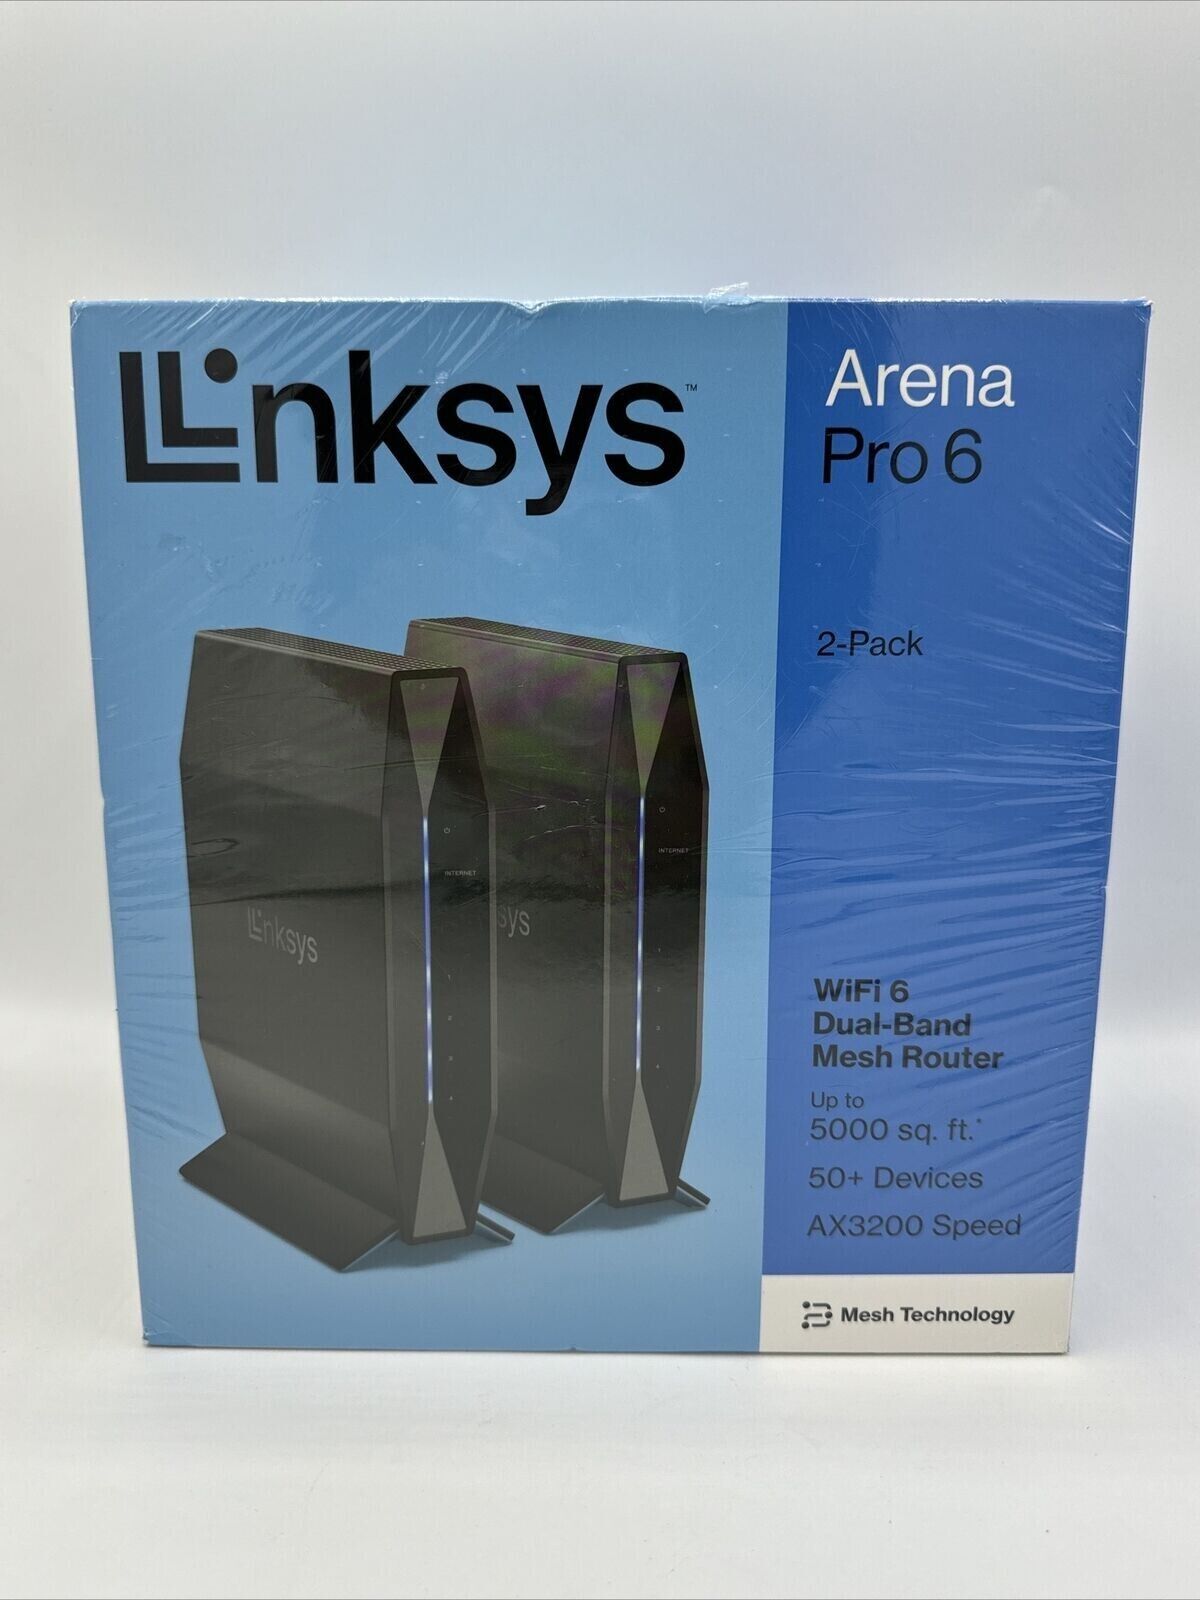 Linksys Arena Pro 6 WiFi 6 Dual Band Mesh Router 2 Pack AX3200 System - NEW